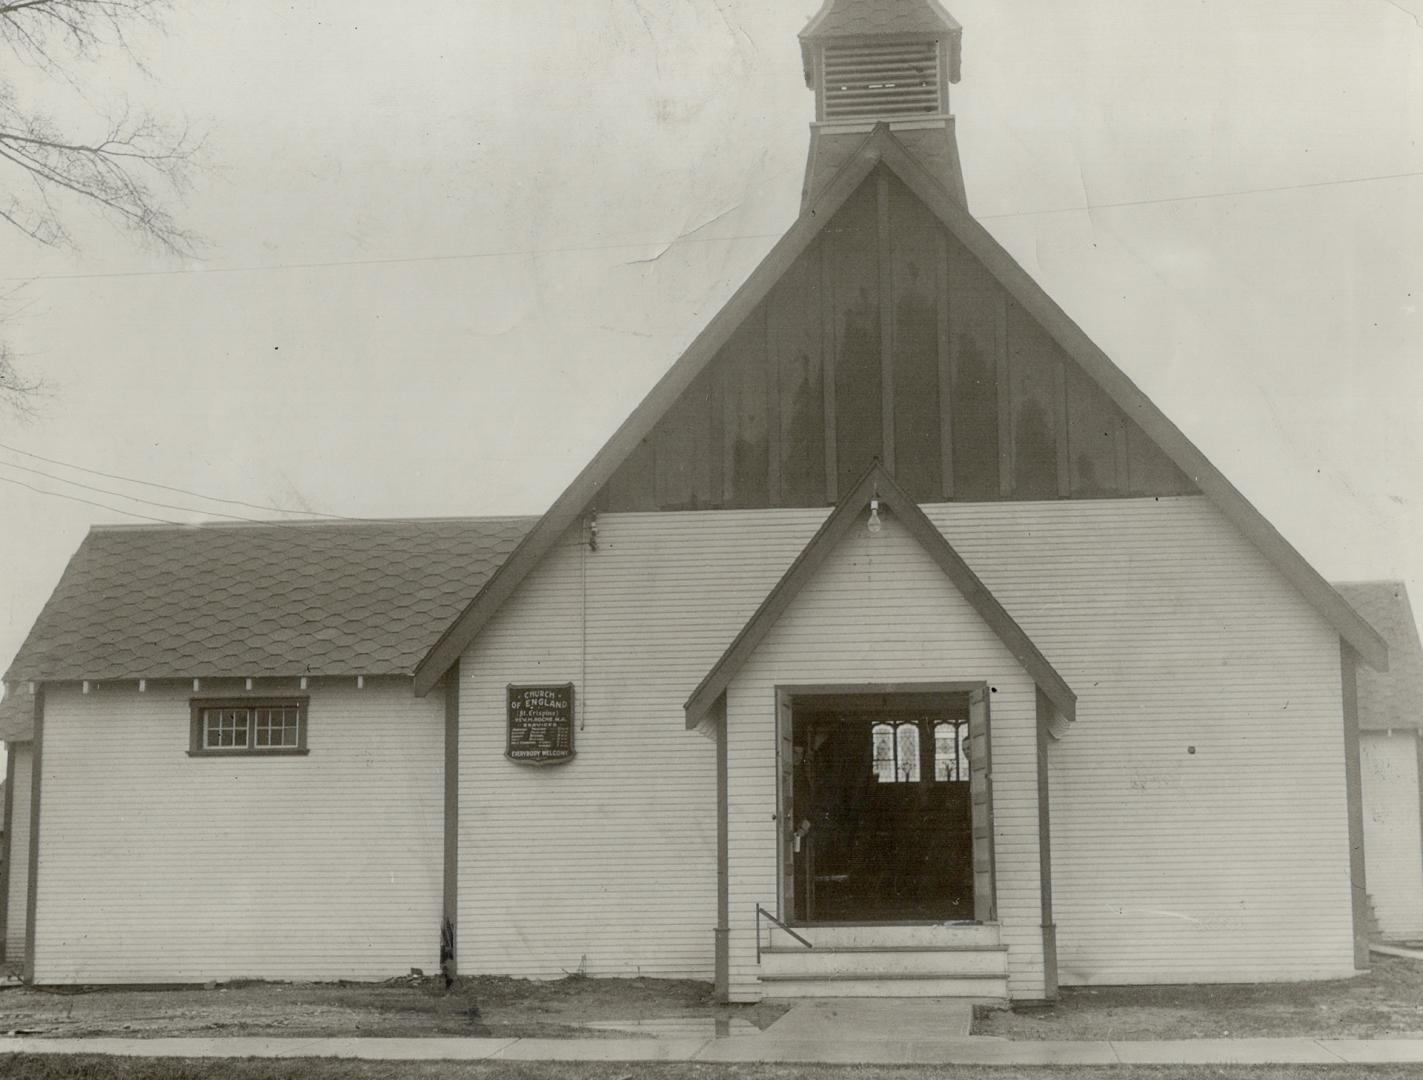 Exterior of church with white siding, honeycomb tile on left roof and small belfry tower above  ...